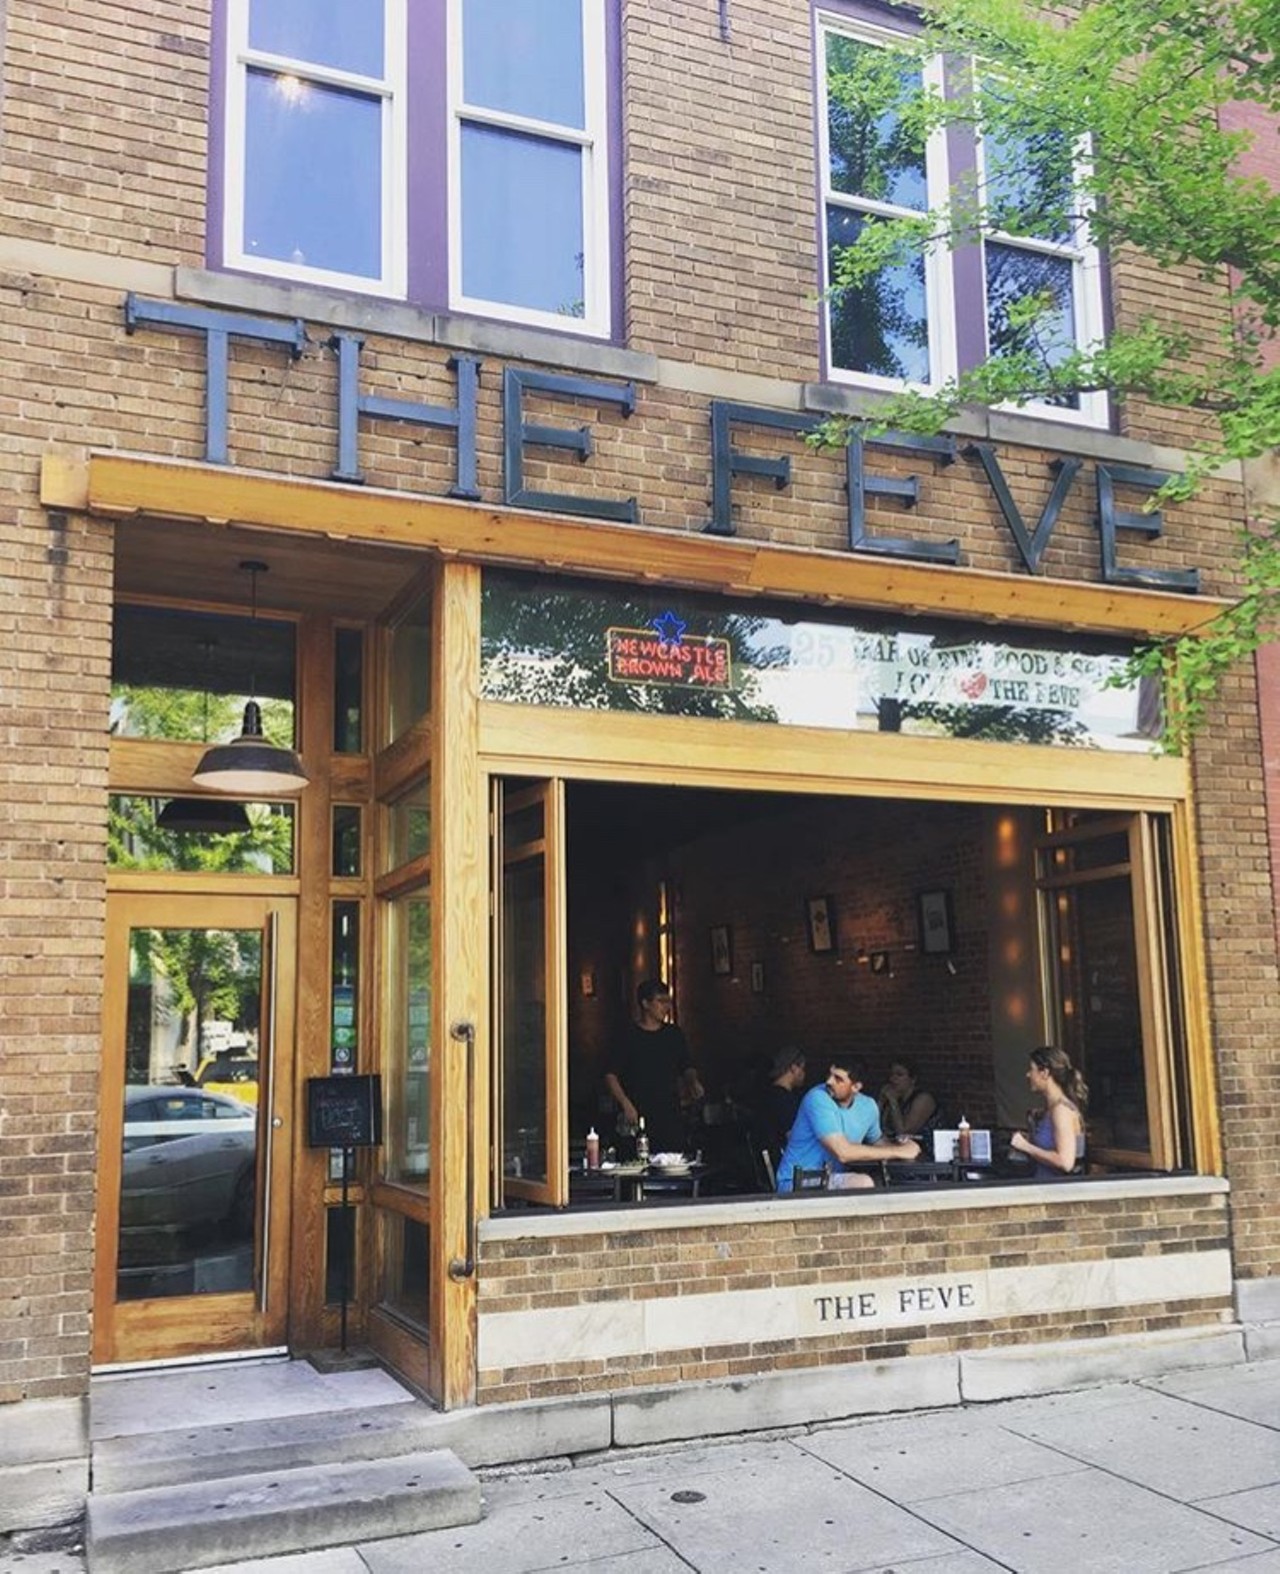  The Feve
30 S Main St, Oberlin
Enjoy a nice lunch one afternoon at this quintessential college town restaurant. All food served here is homemade and sourced locally. From tater tots to B.LT.s, there is something for everyone to enjoy. 
Photo via love_thefeve/Instagram